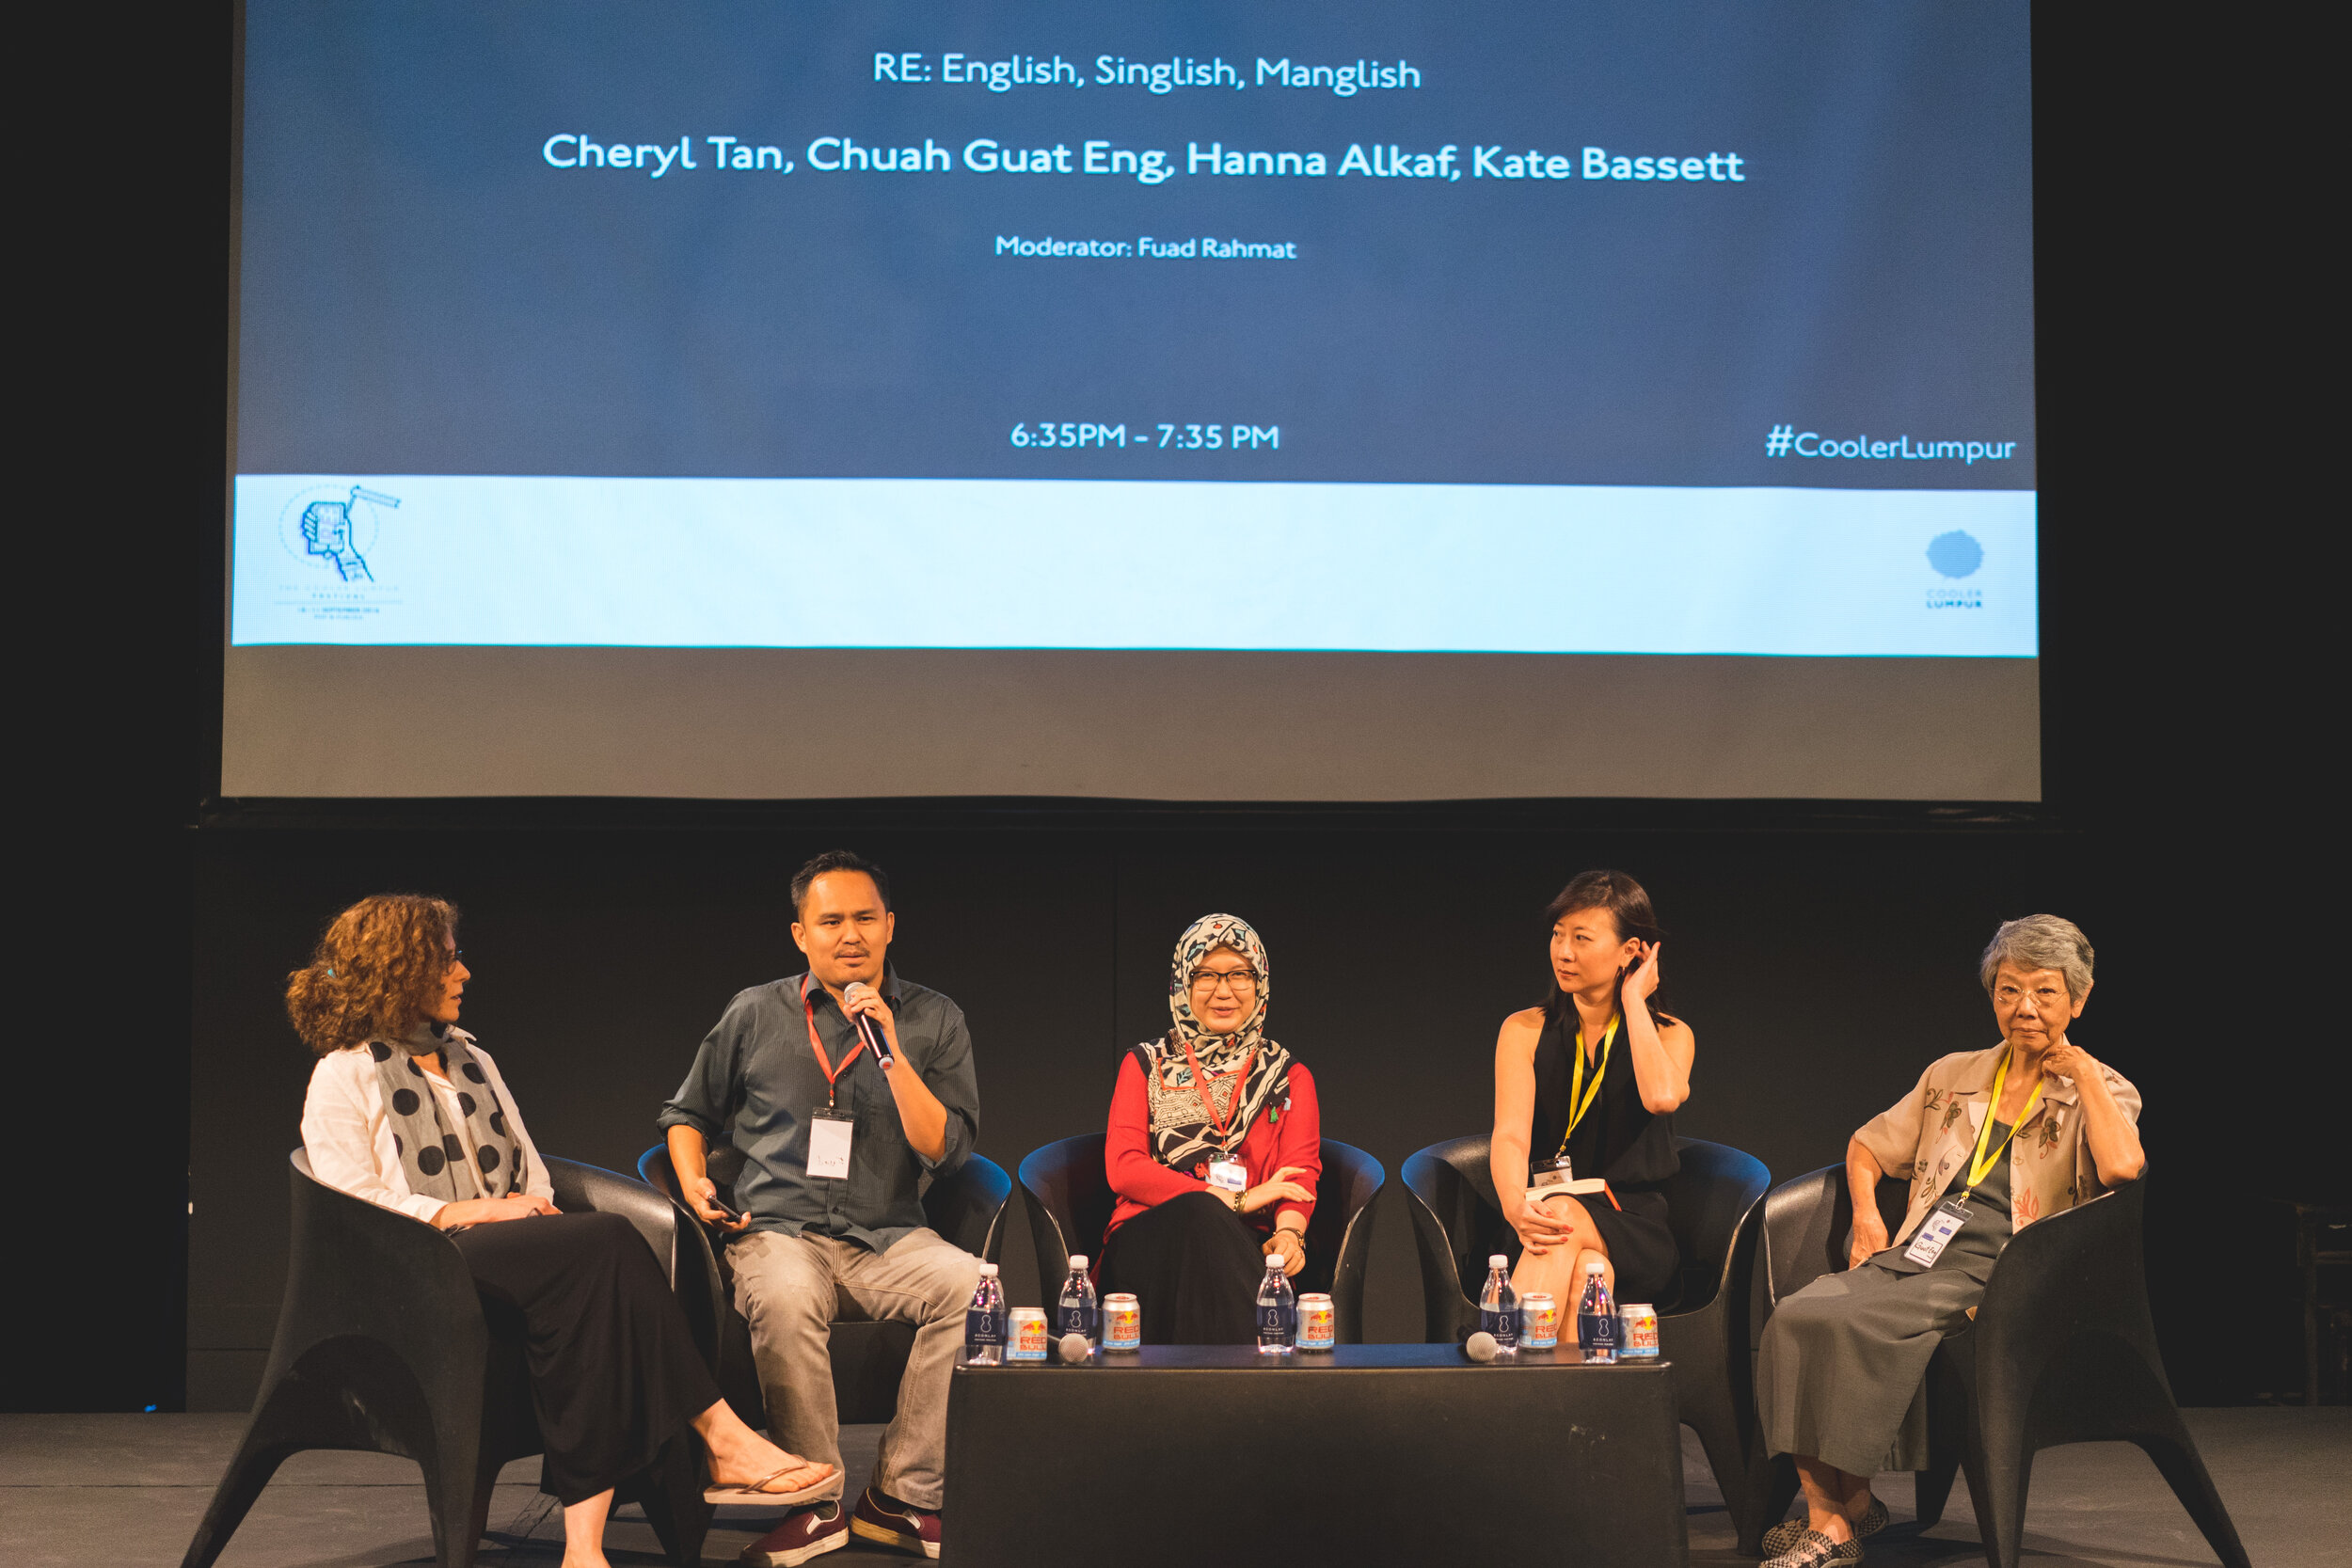 Kate Bassett, renowned British theatre critic and NY-based author Cheryl Lu-Lien Tan (US) sharing their thoughts during their panel session with Malaysian speakers speakers Hanna Alkaf, Chuah Guat Eng, and Fuad Rahmat.jpg